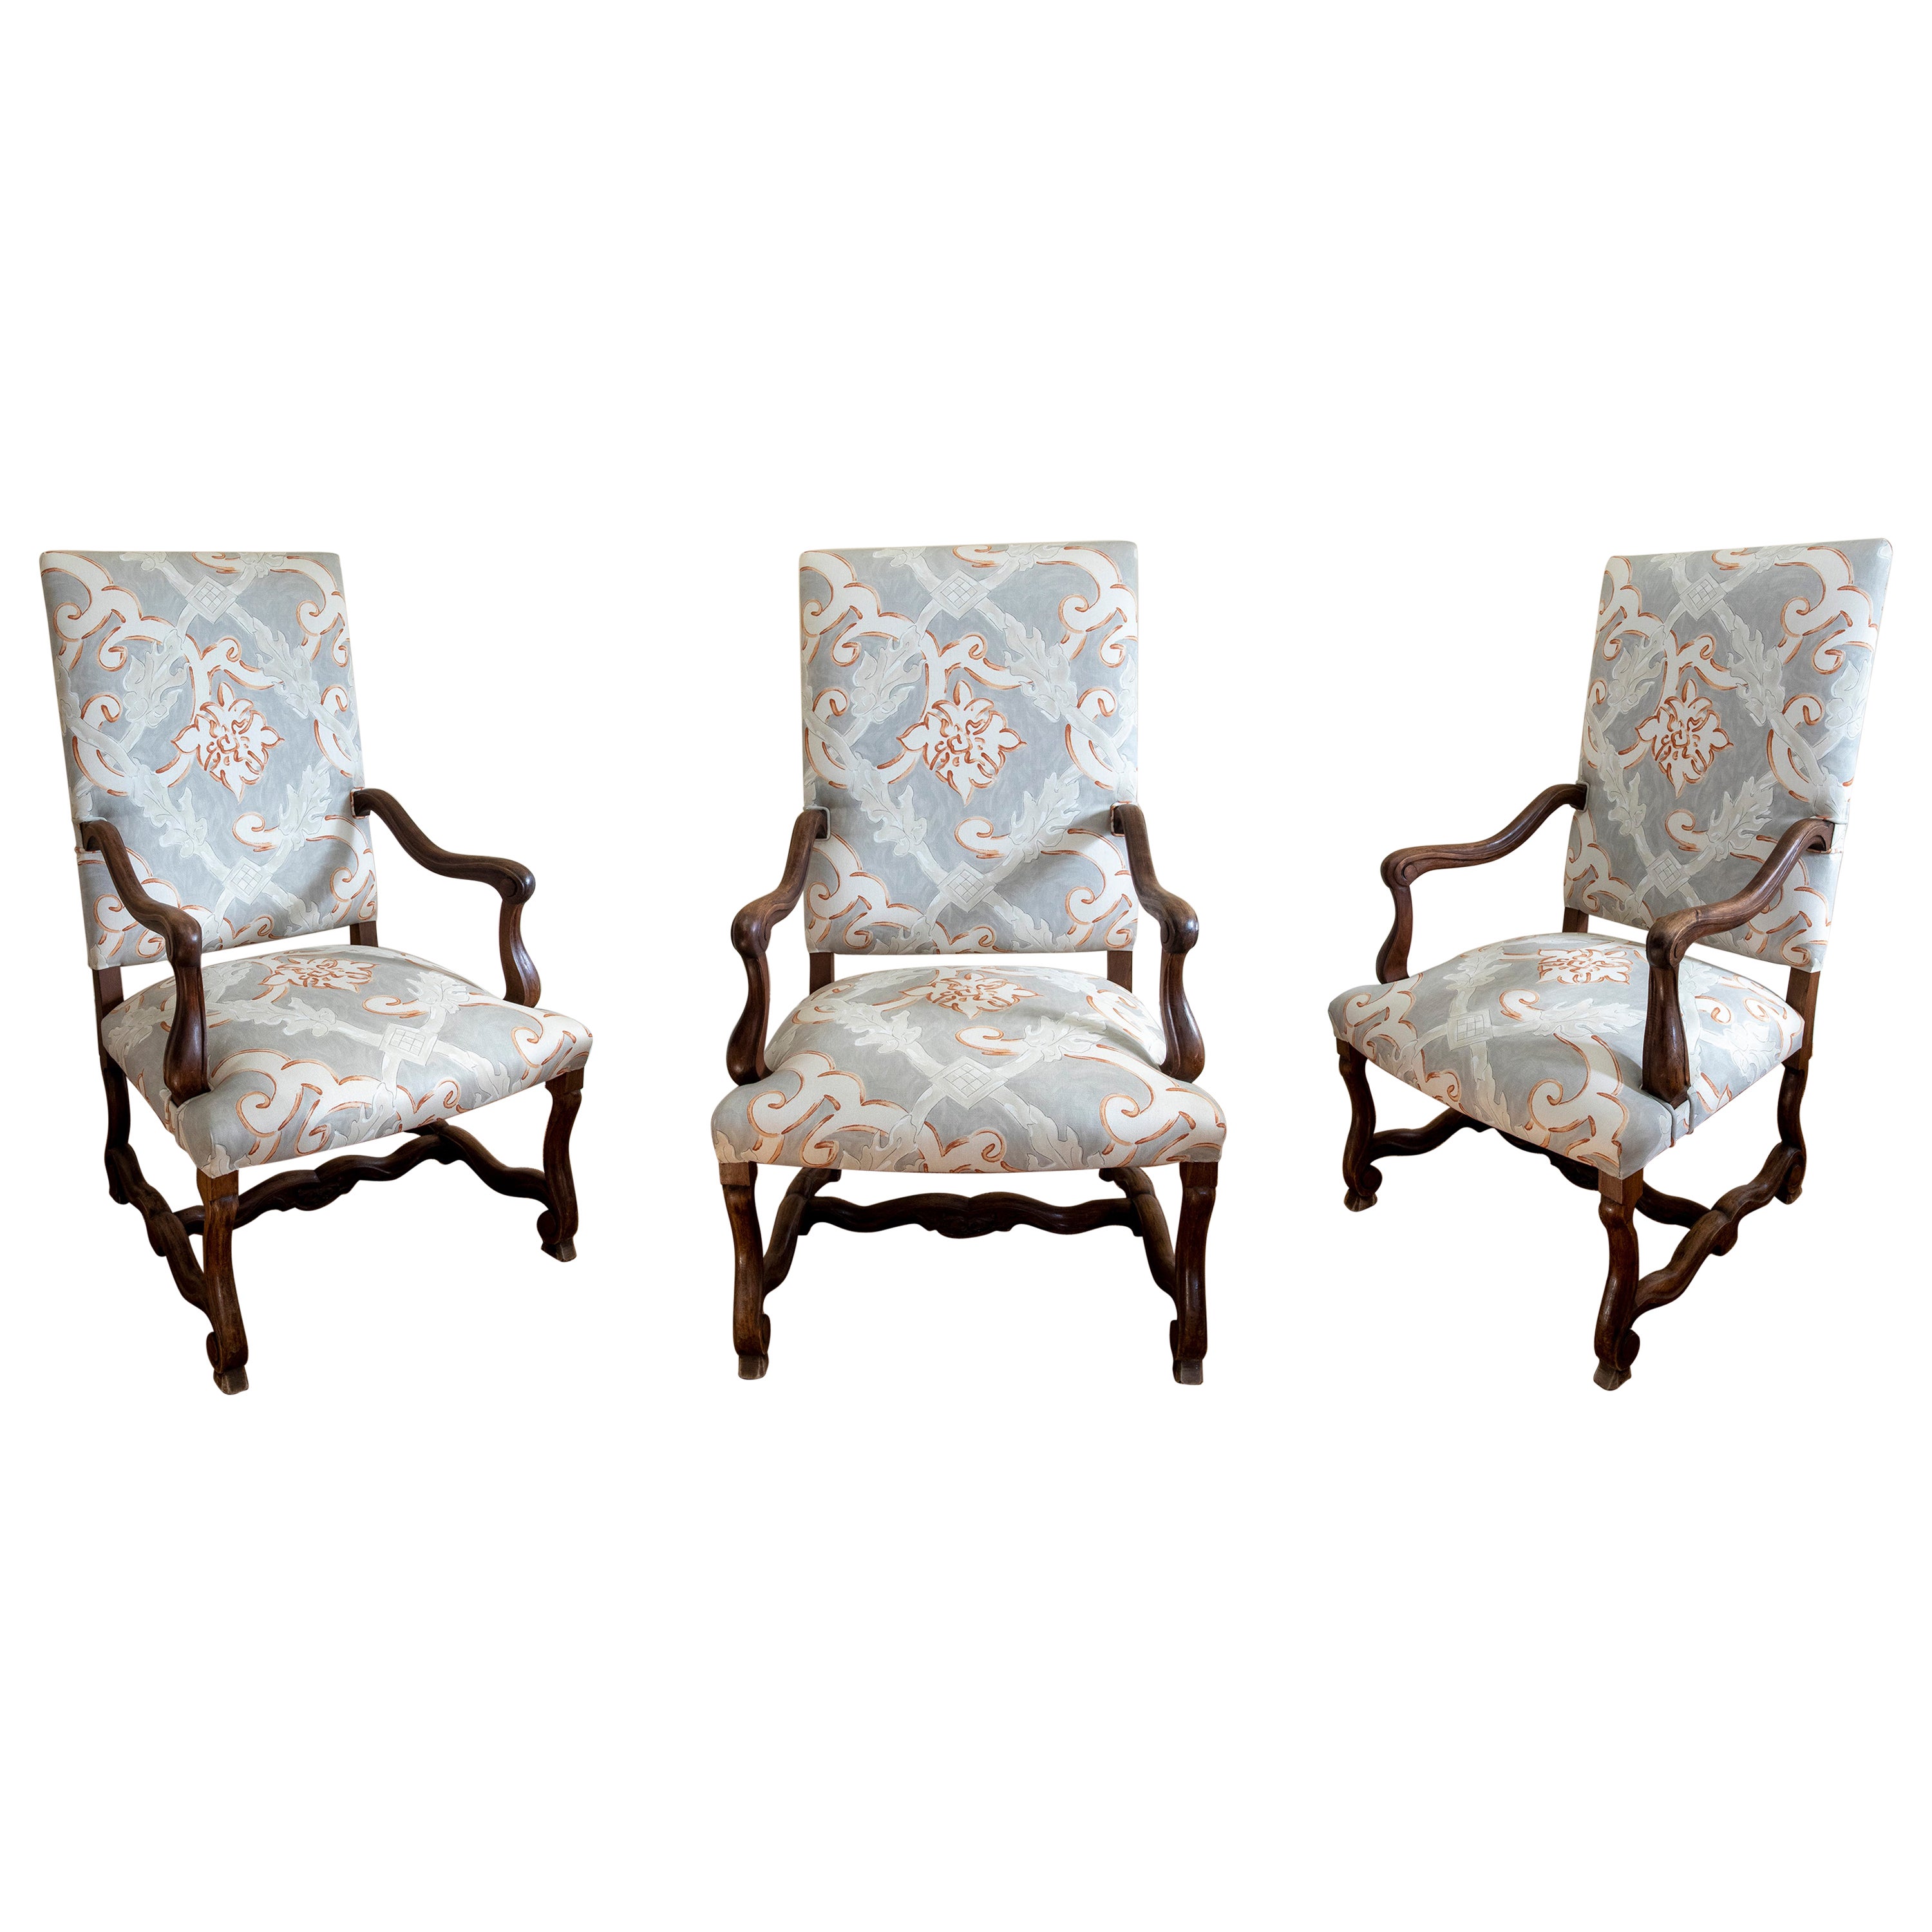 19th century Spanish Set of Three Wooden Armchairs For Sale